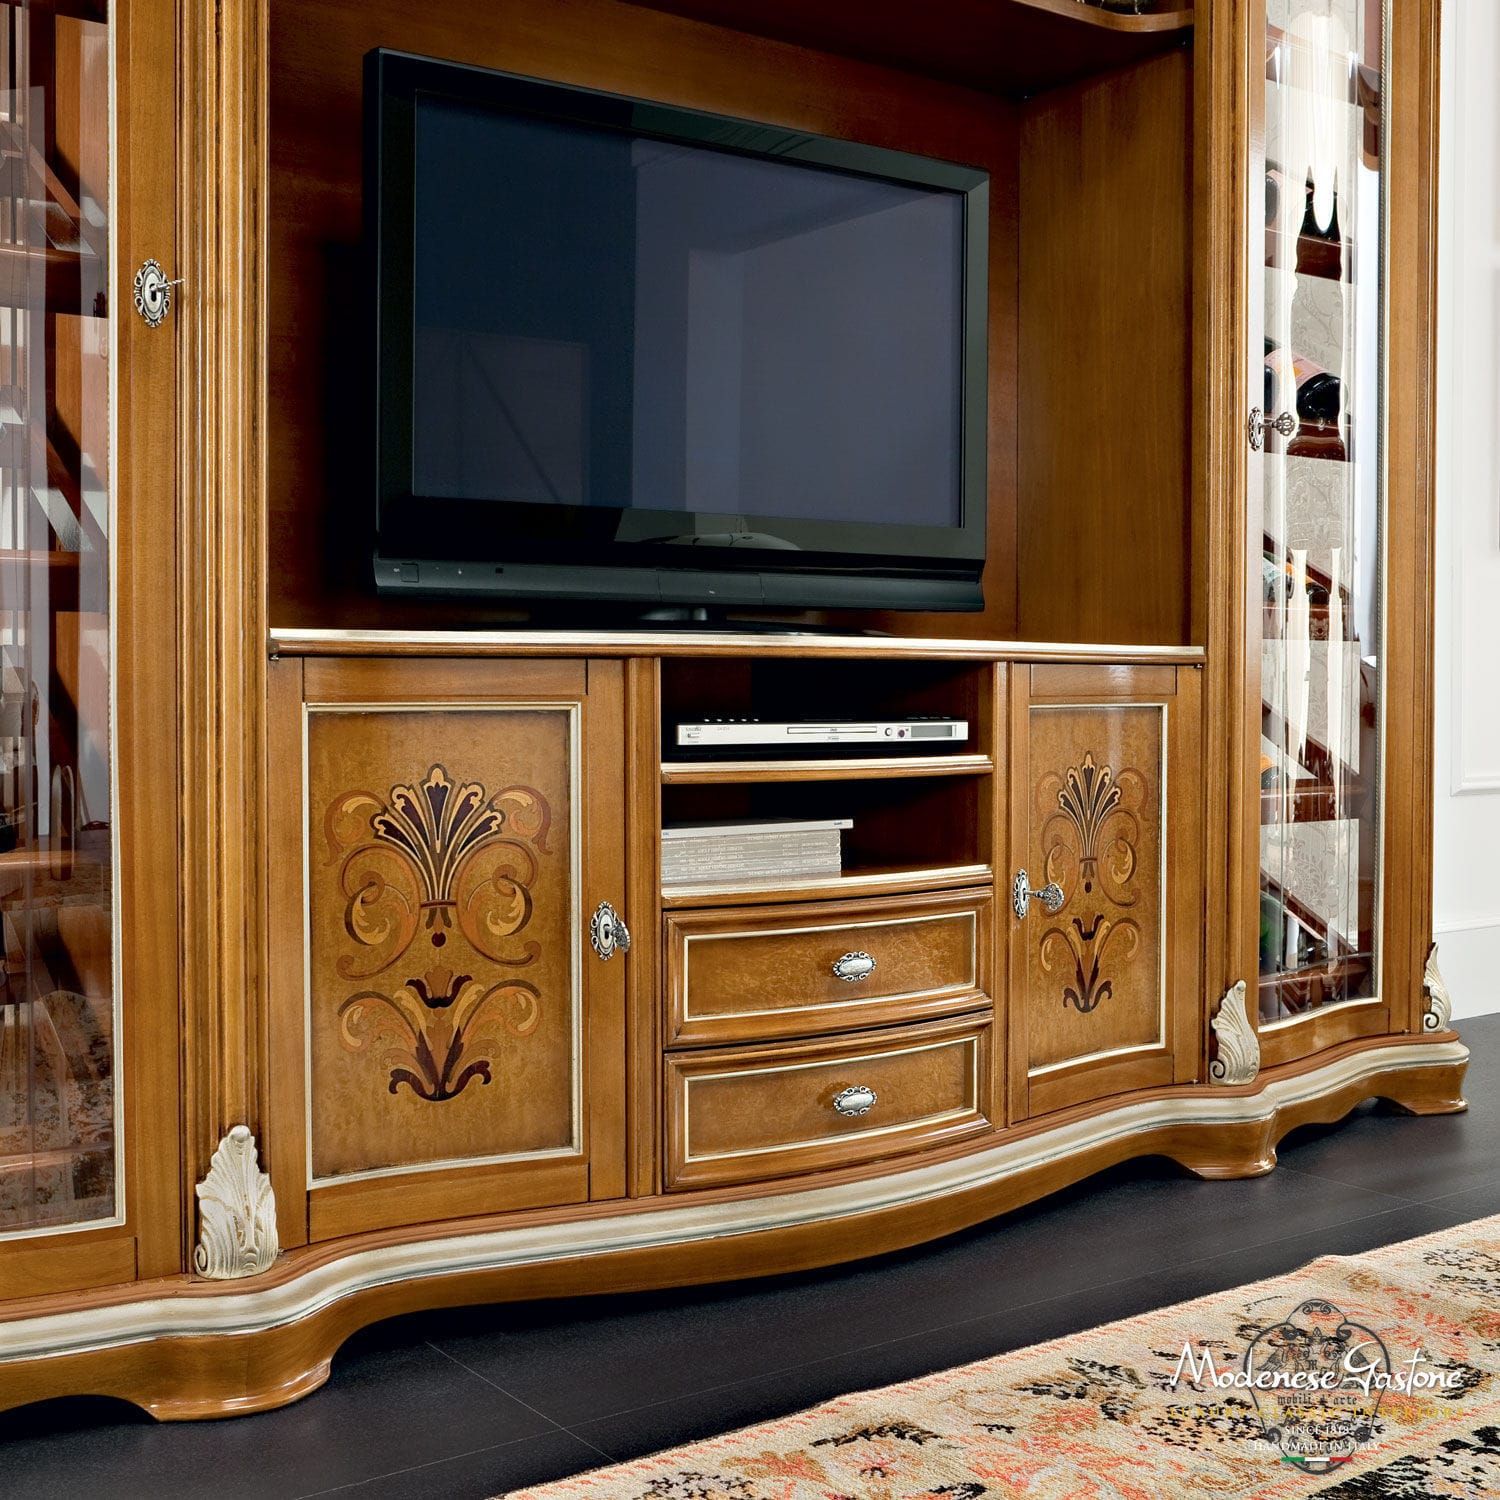 Classic Tv Cabinet – Bella Vita – Modenese Interiors Intended For Alden Design Wooden Tv Stands With Storage Cabinet Espresso (View 2 of 15)